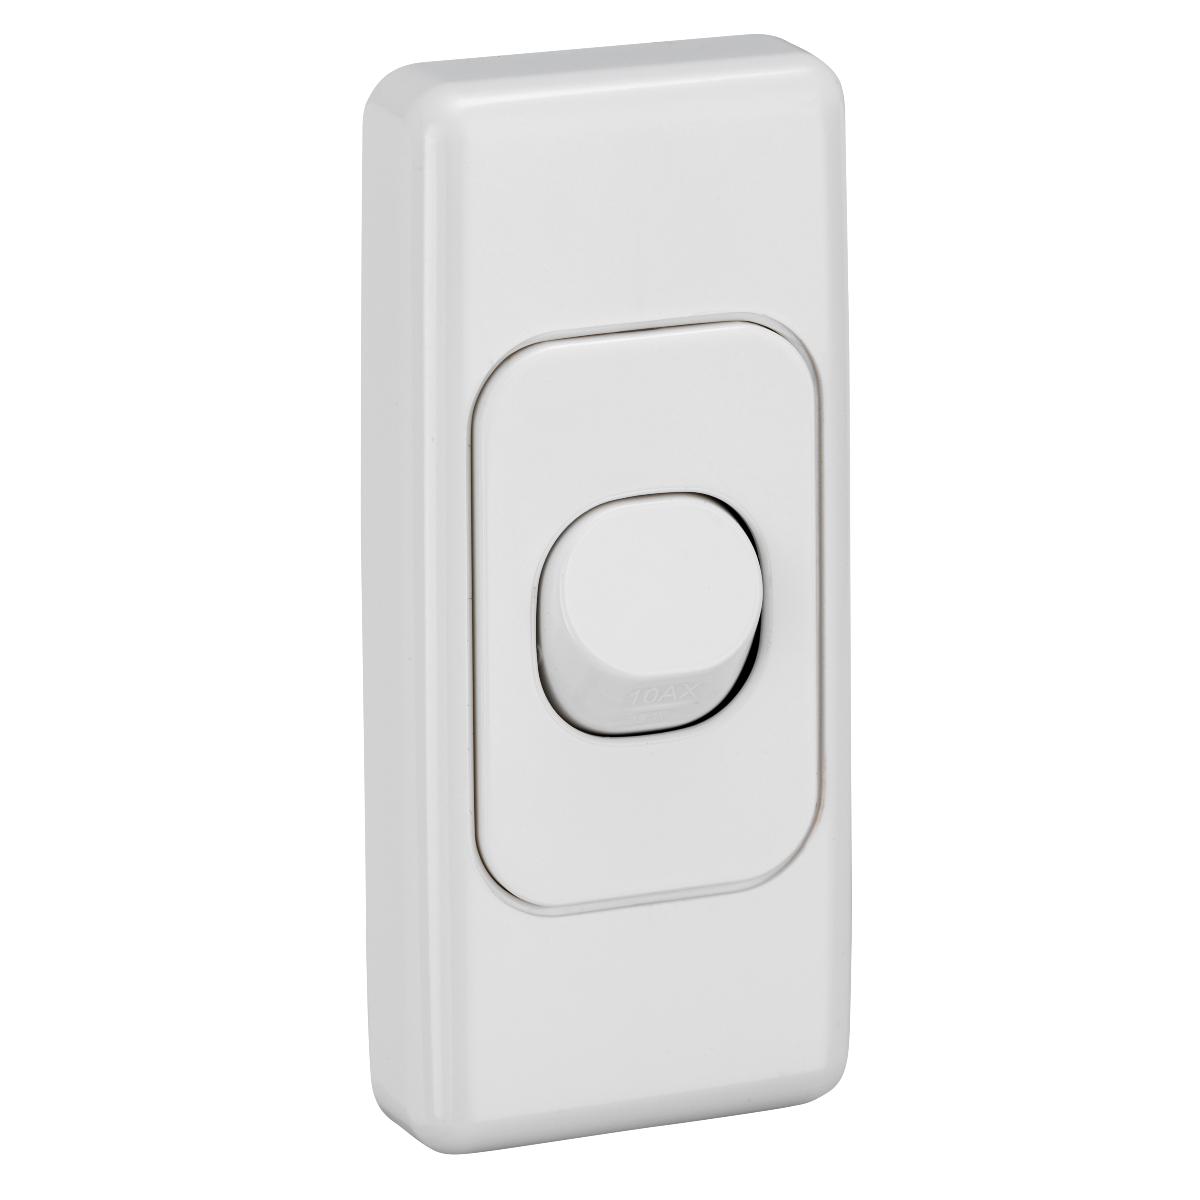 2000 ARCH SWITCH 1G 10A WHITE